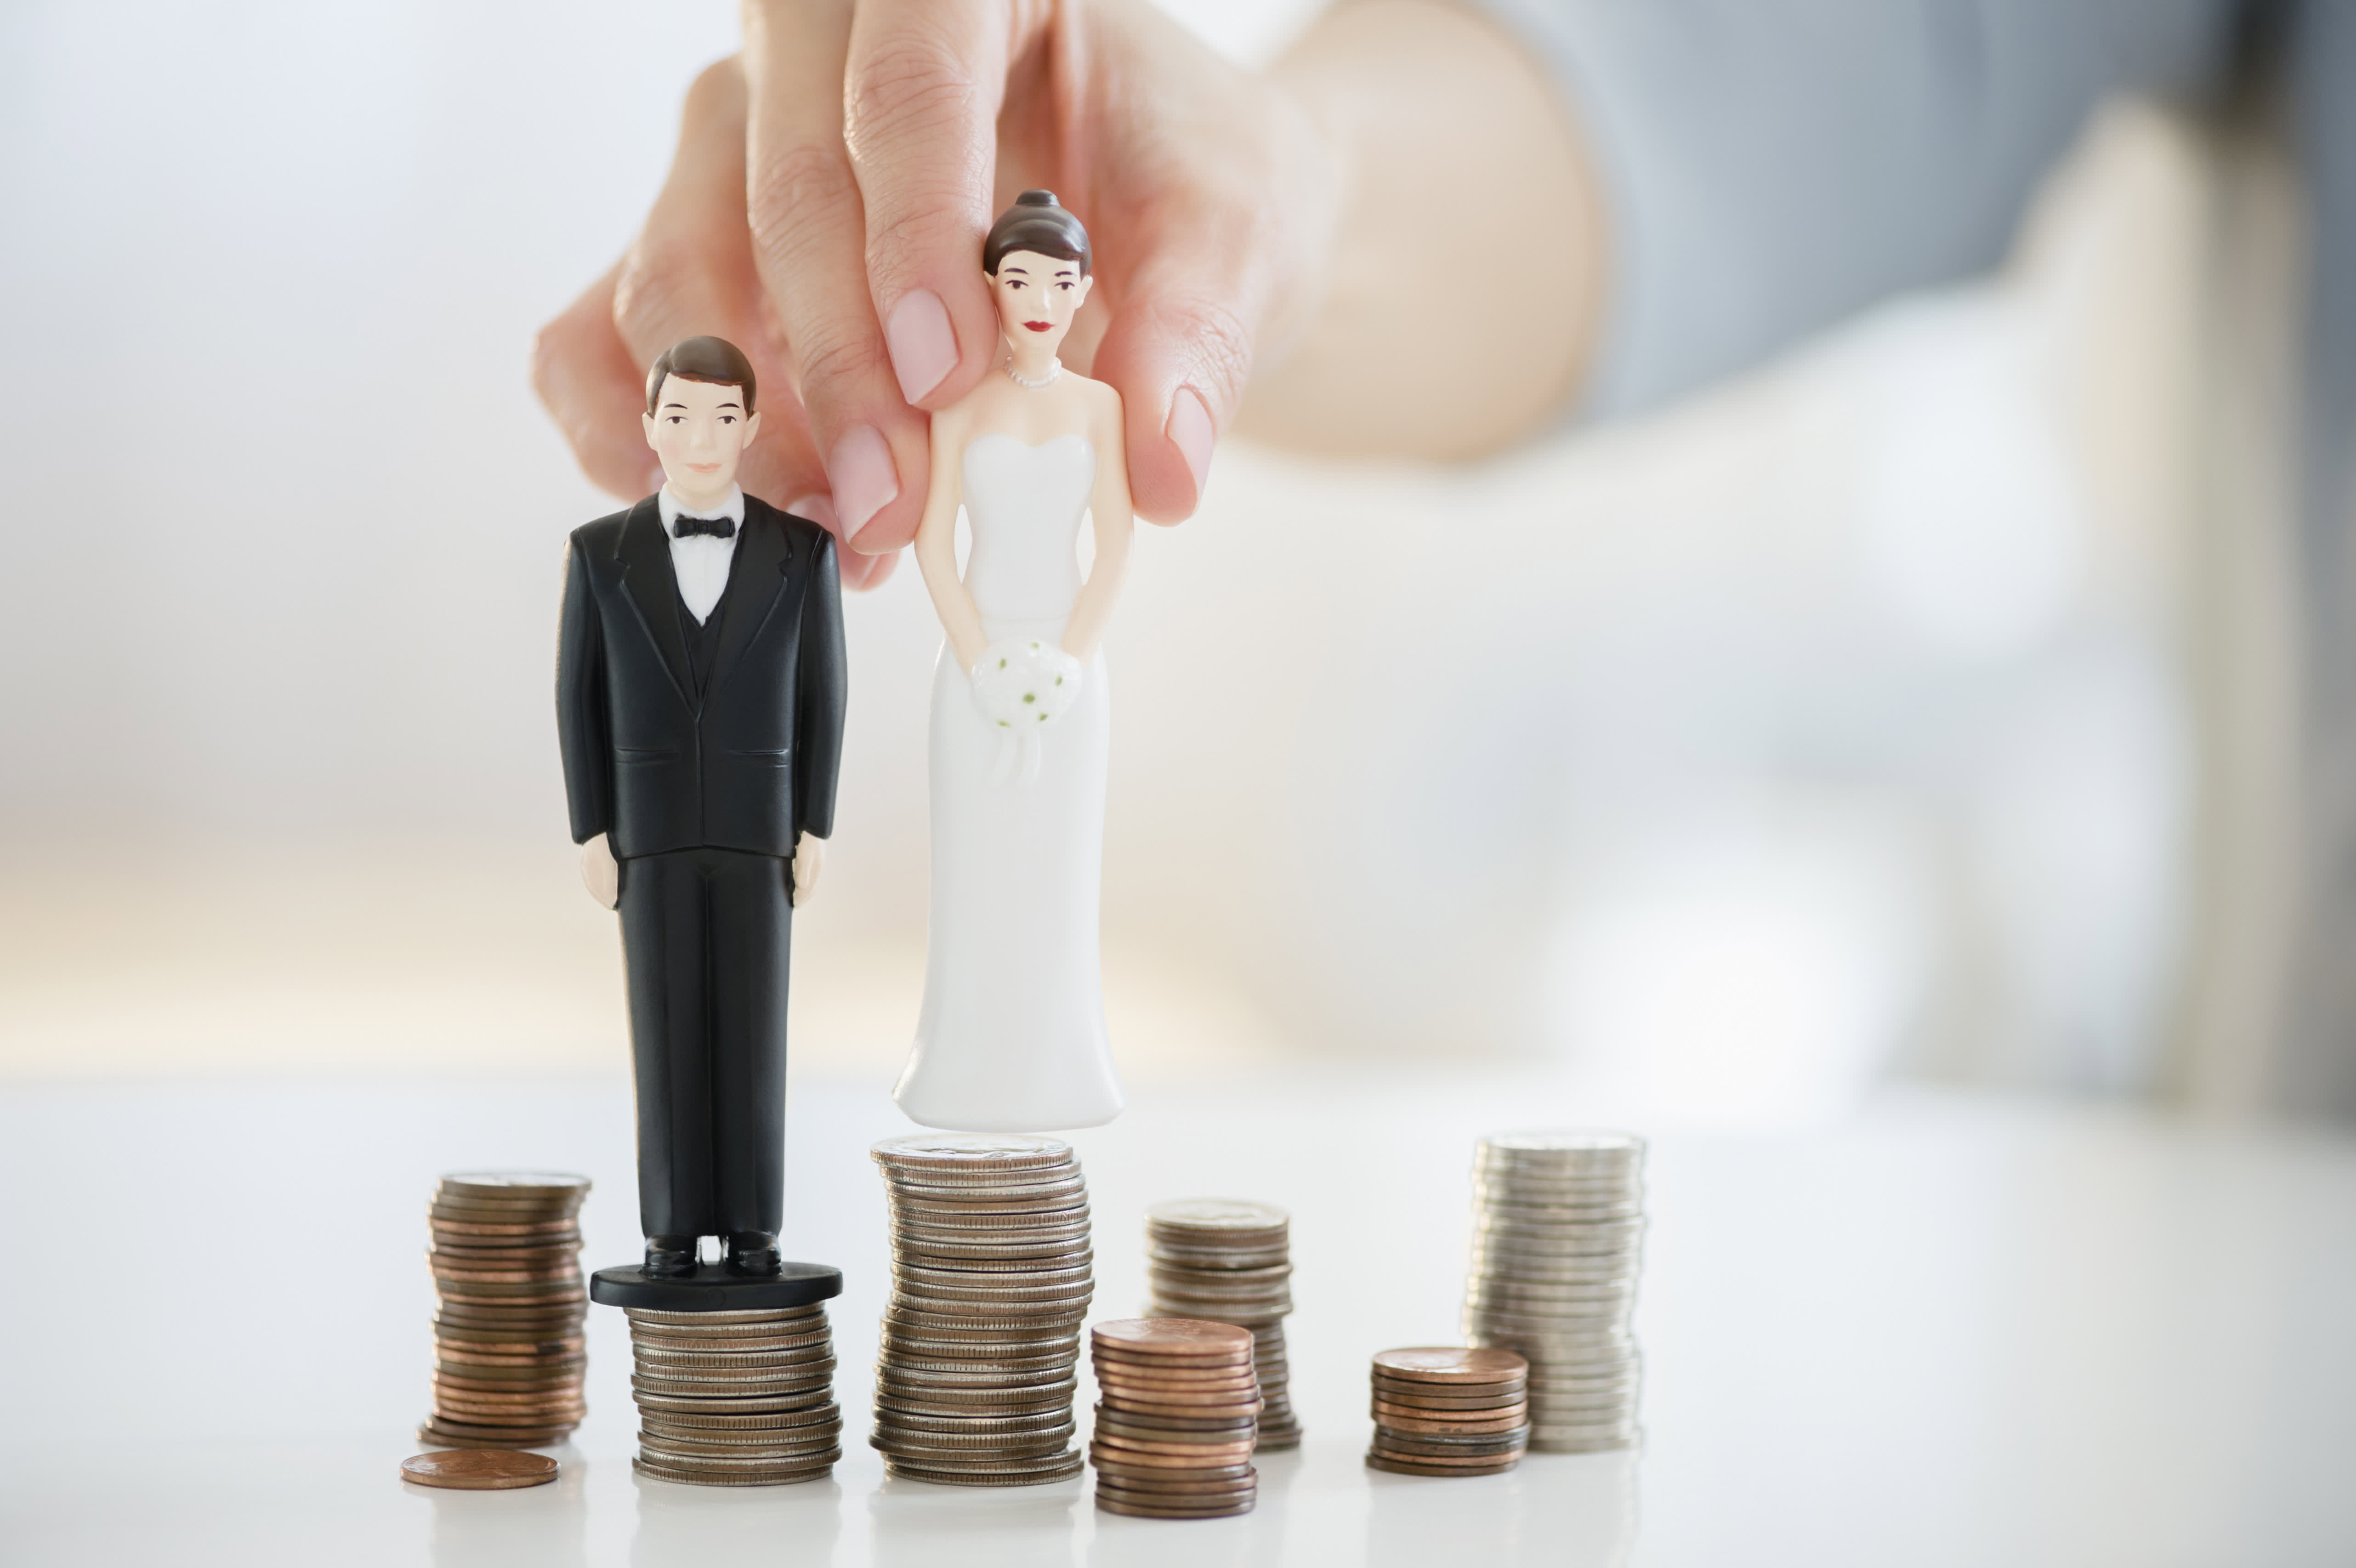 Financial advisors can give newlyweds financial compatibility as gift